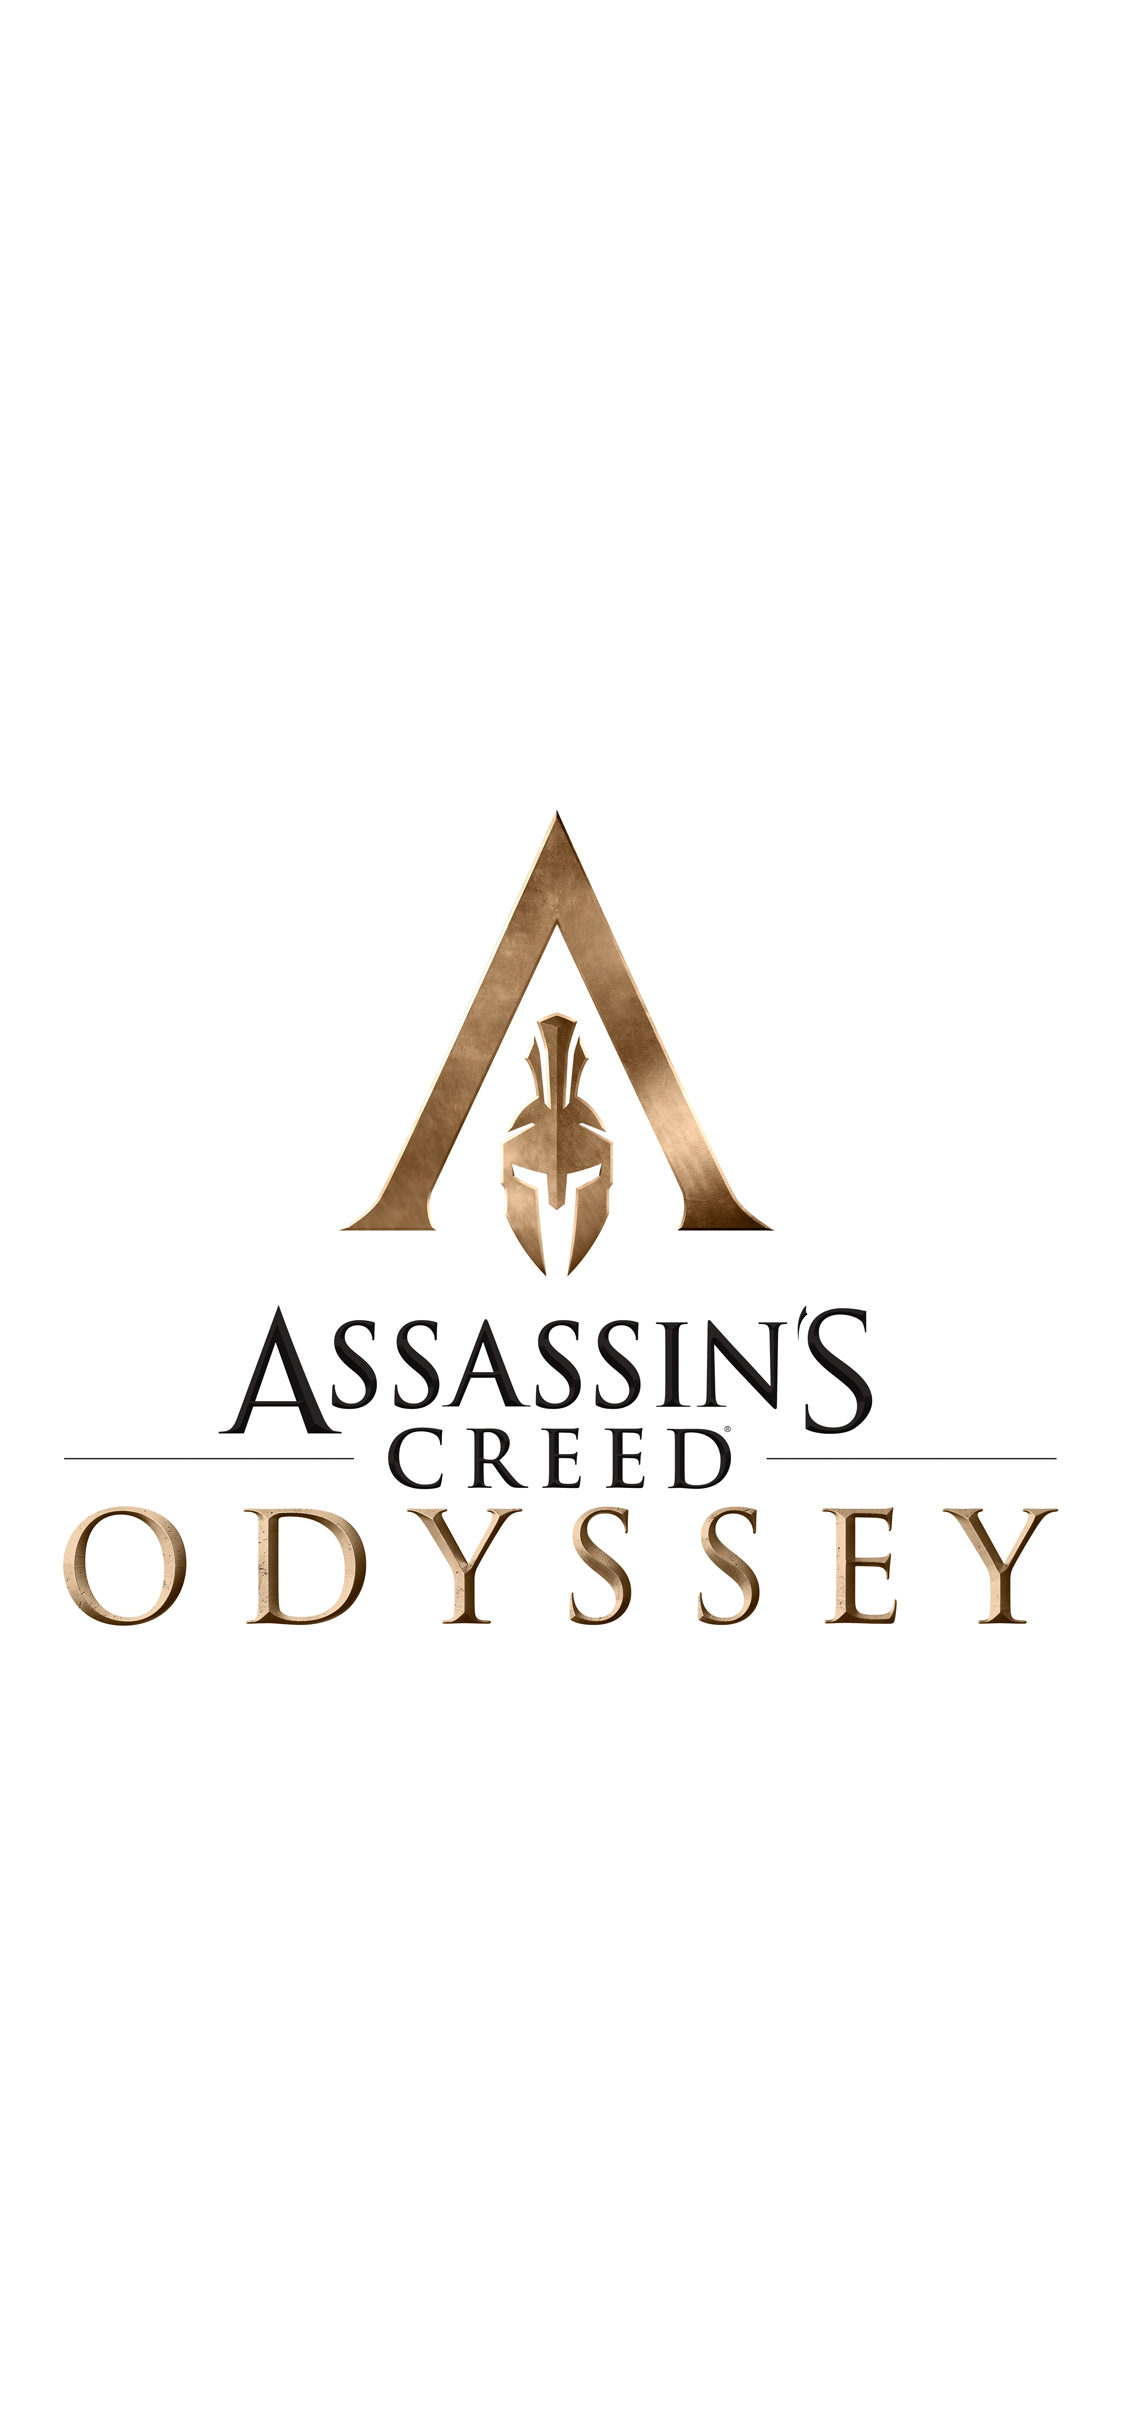 Assassins Creed Odyssey Iphone X Wallpaper - Assassin's Creed , HD Wallpaper & Backgrounds